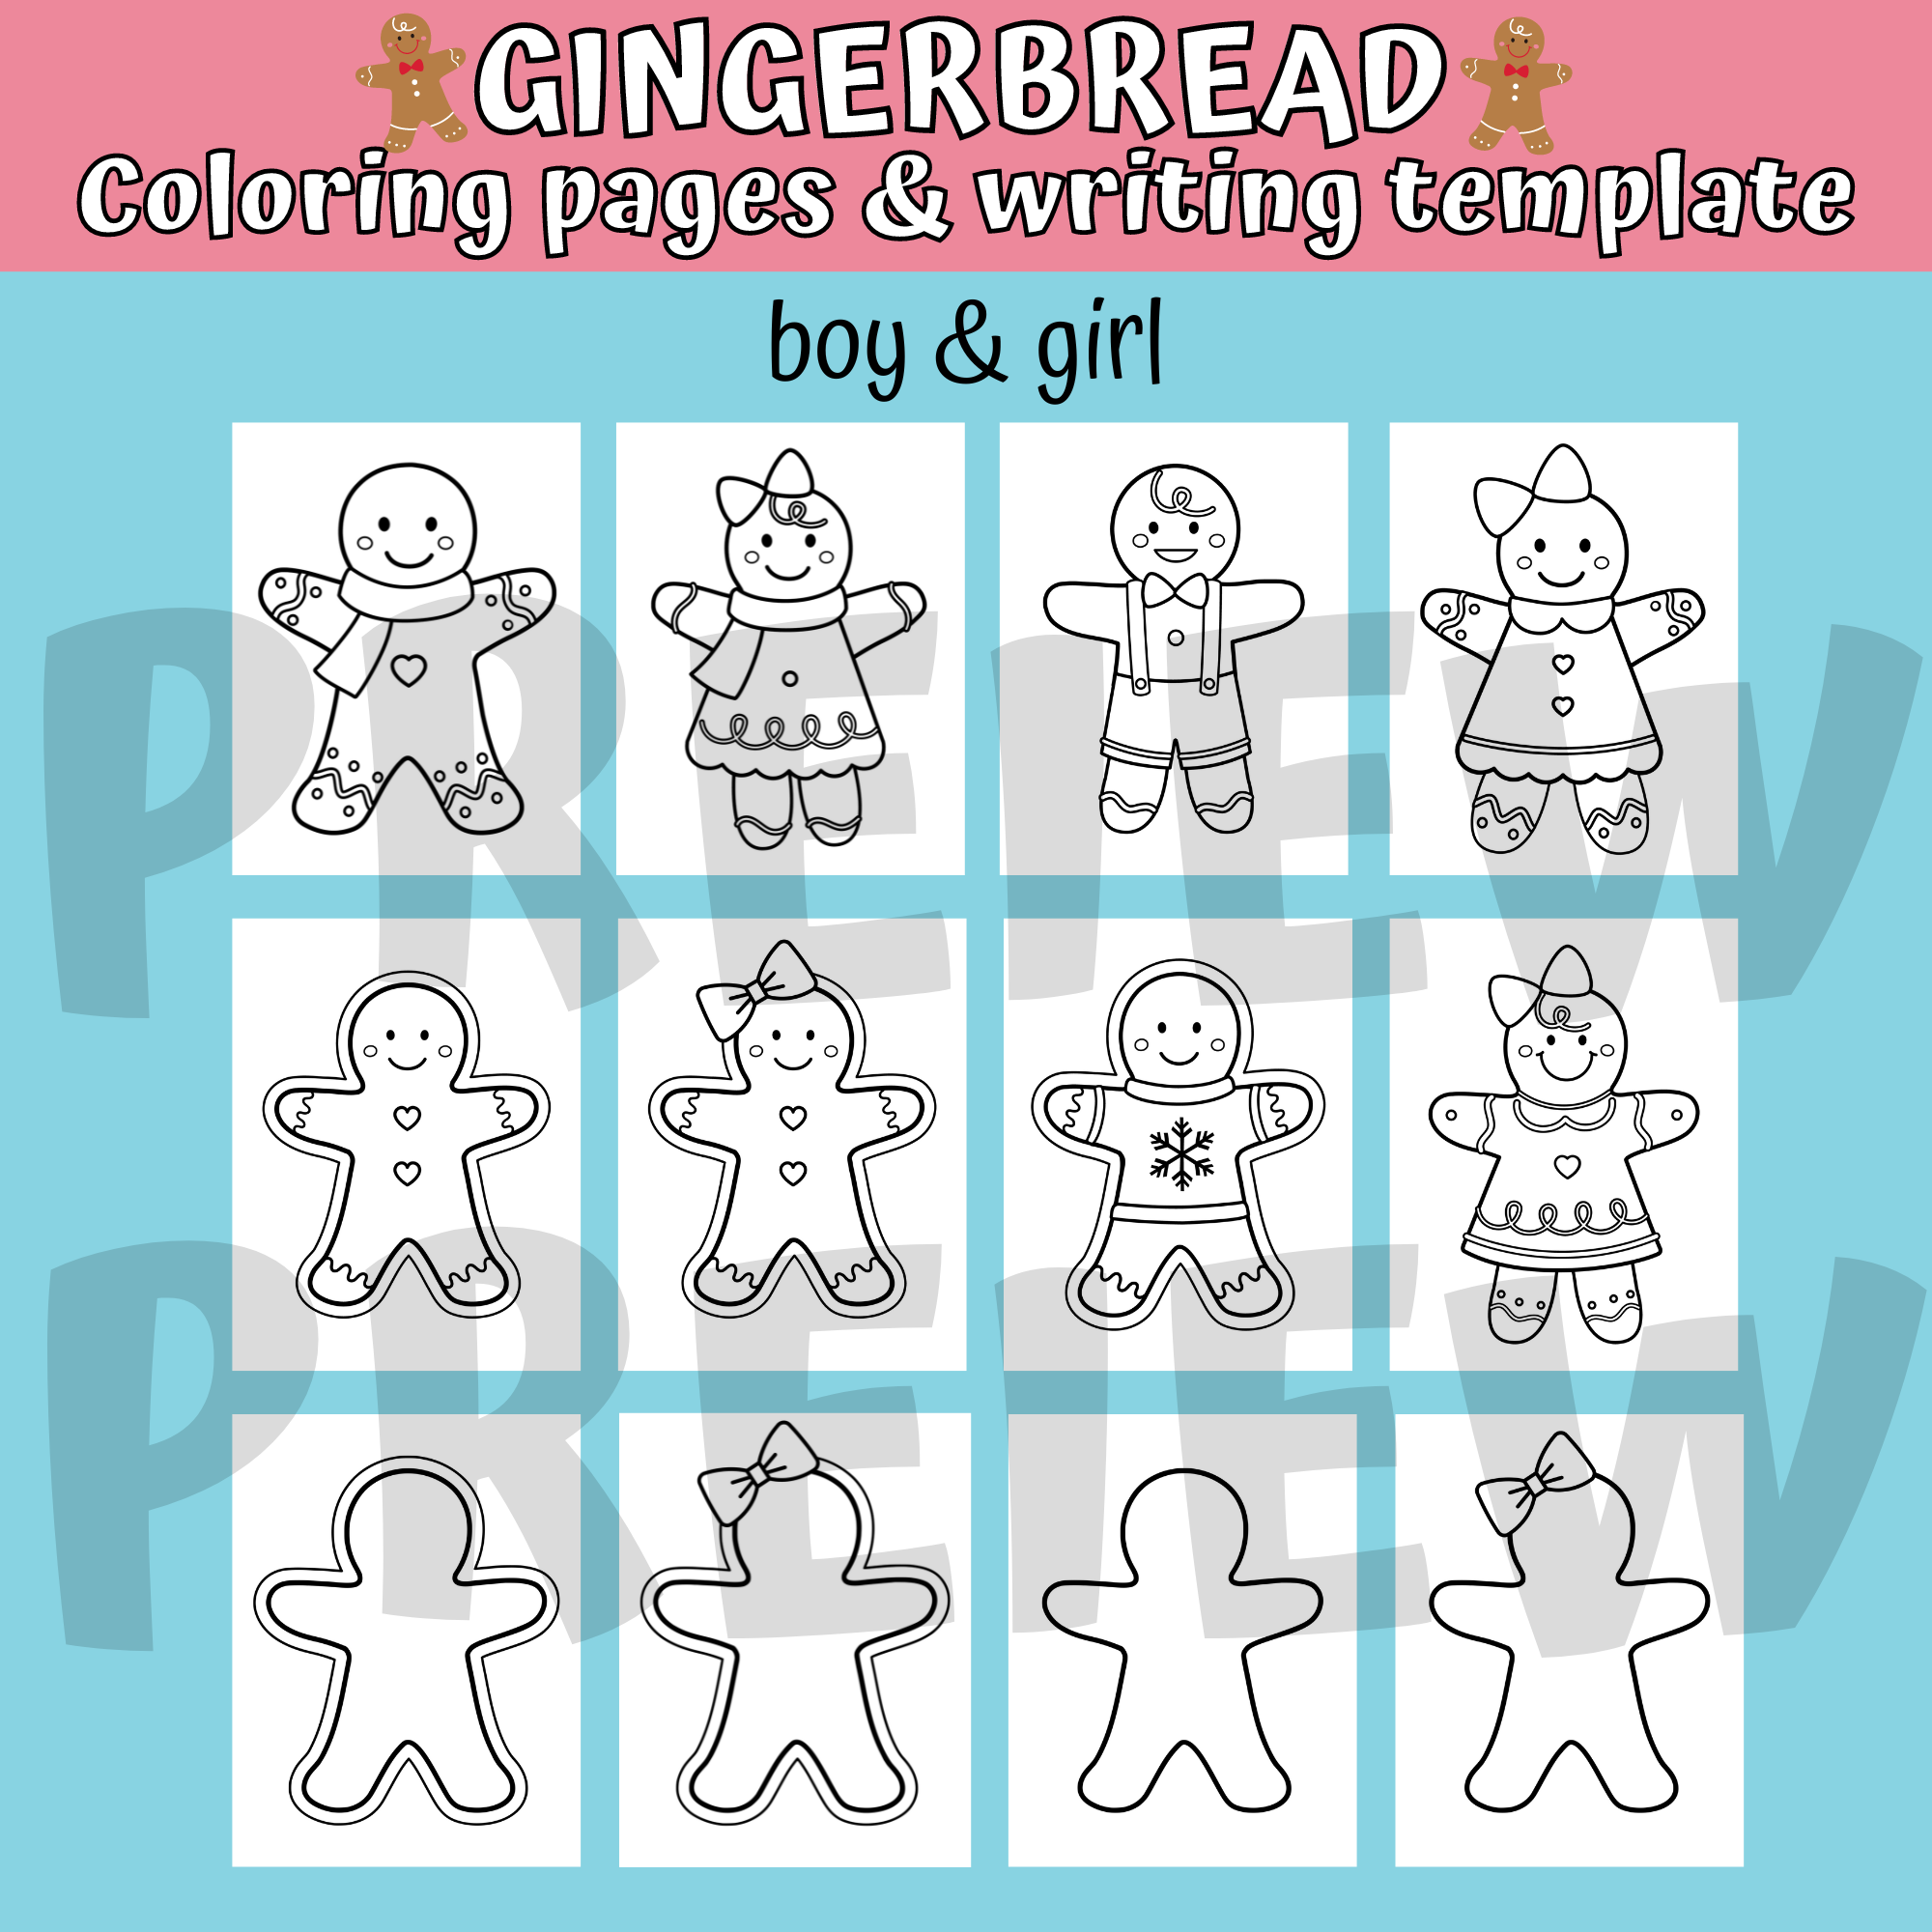 Gingerbread man gingerbread house coloring pages gingerbread writing template made by teachers